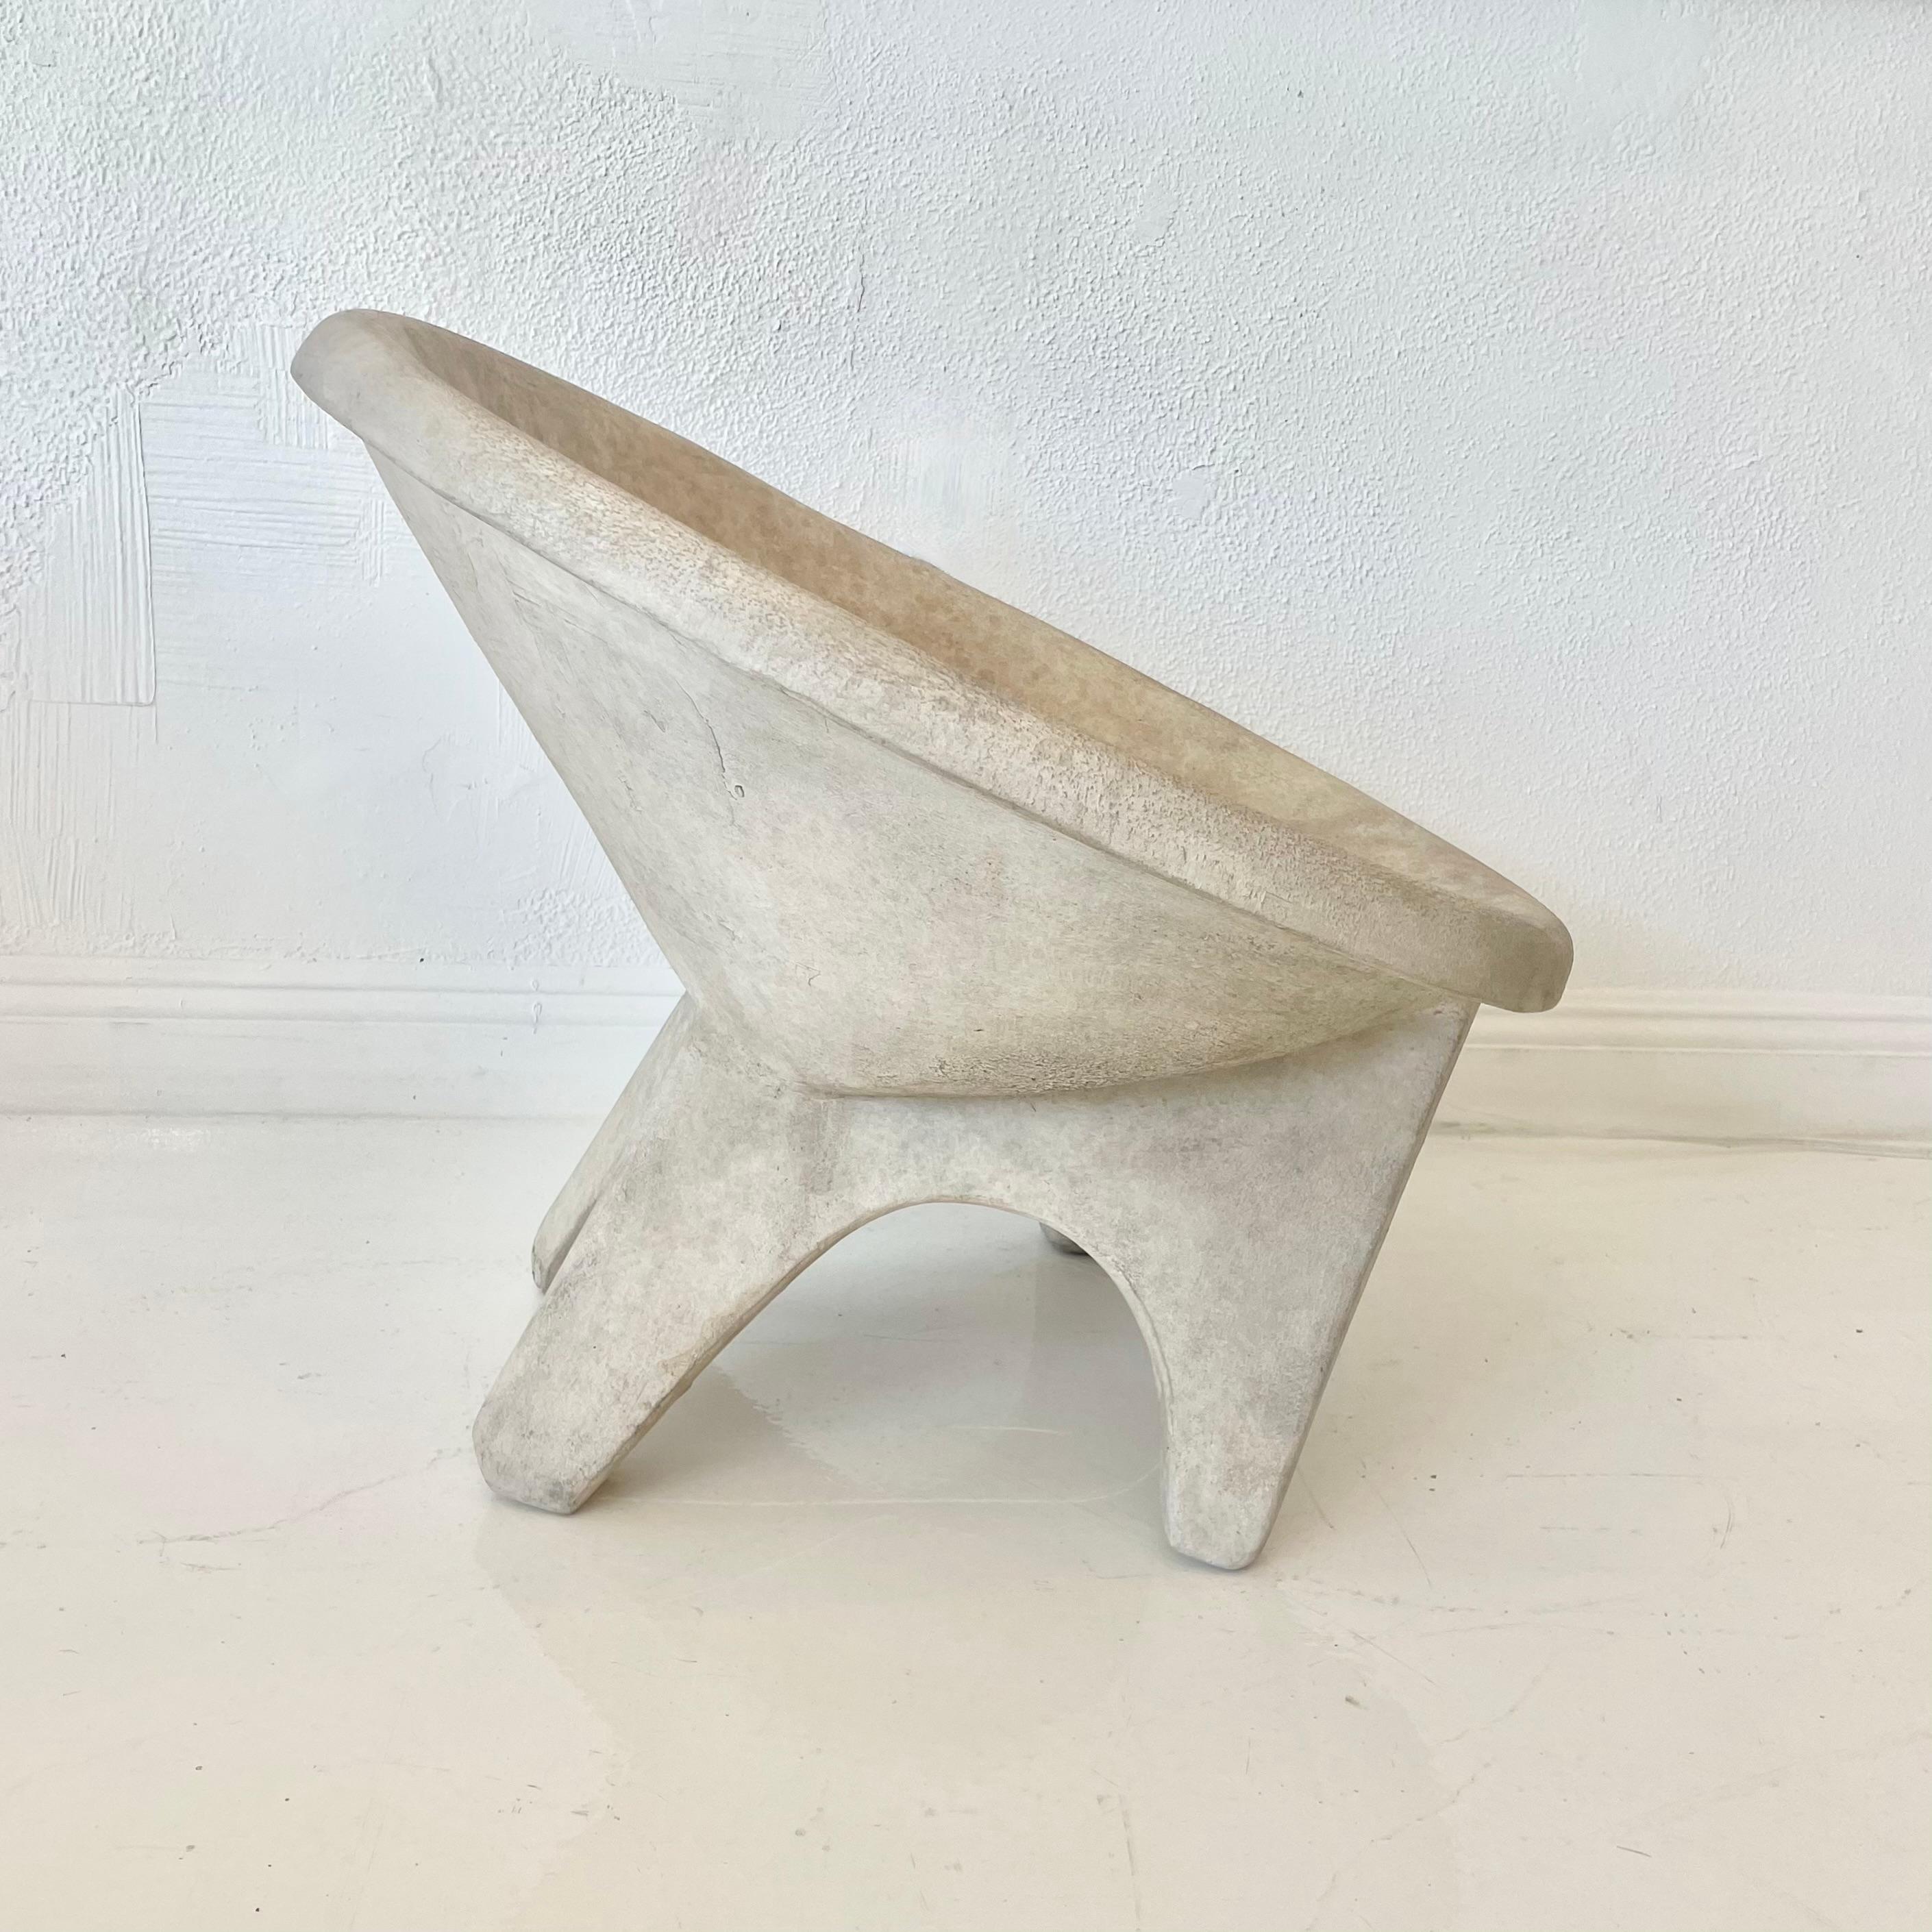 Hand-Crafted Sculptural Concrete Chair by Merit, Los Angeles For Sale